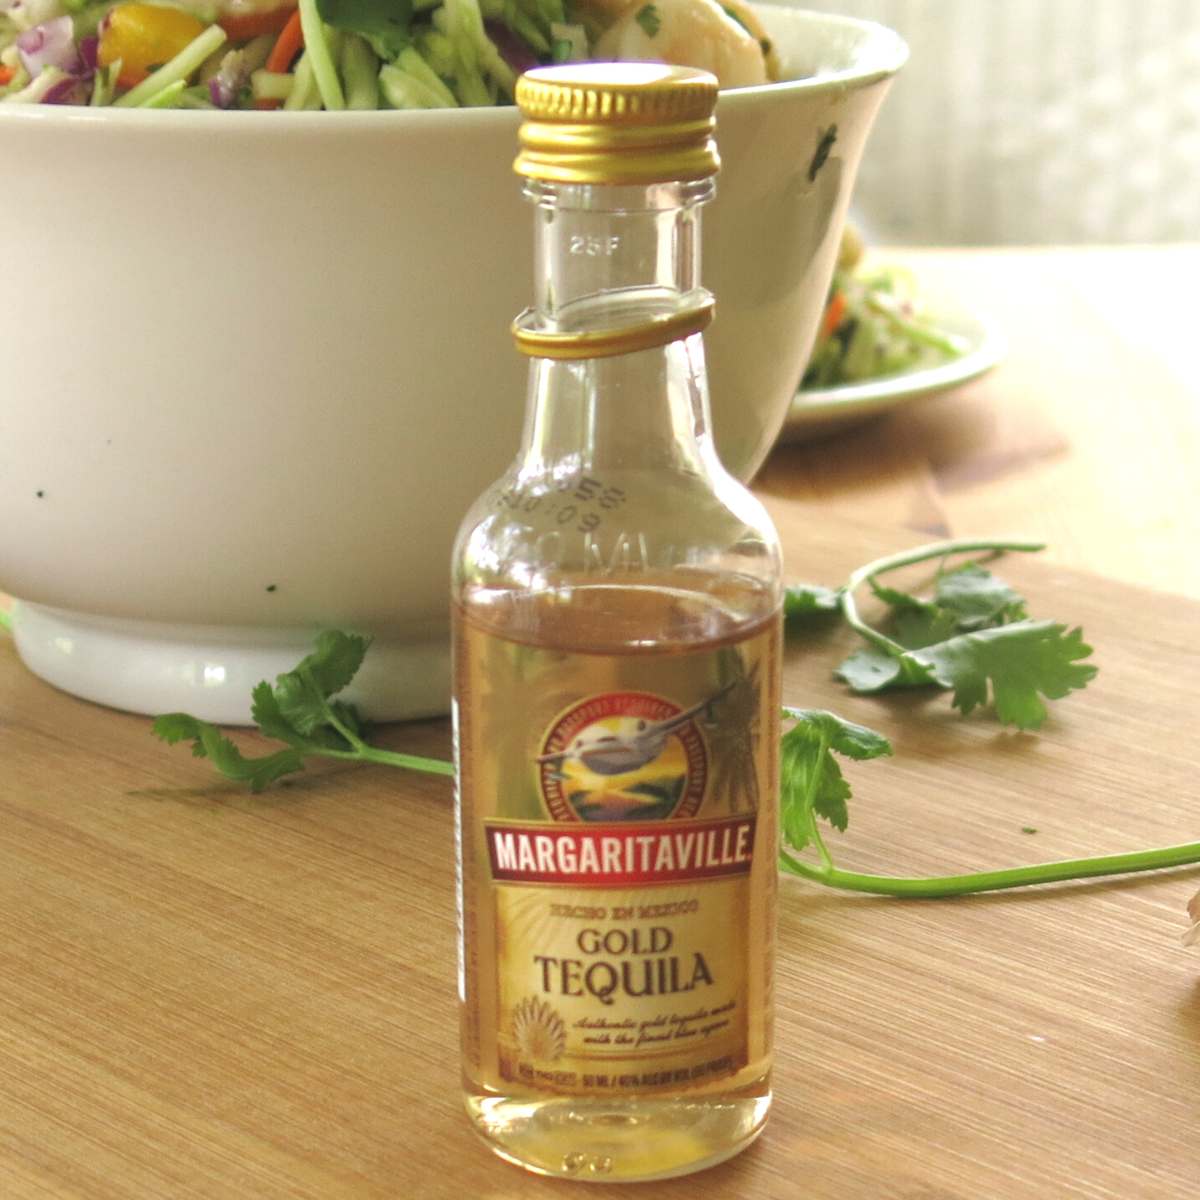 Very small bottle of Margaritaville Gold Tequila in front of bowl with shrimp.